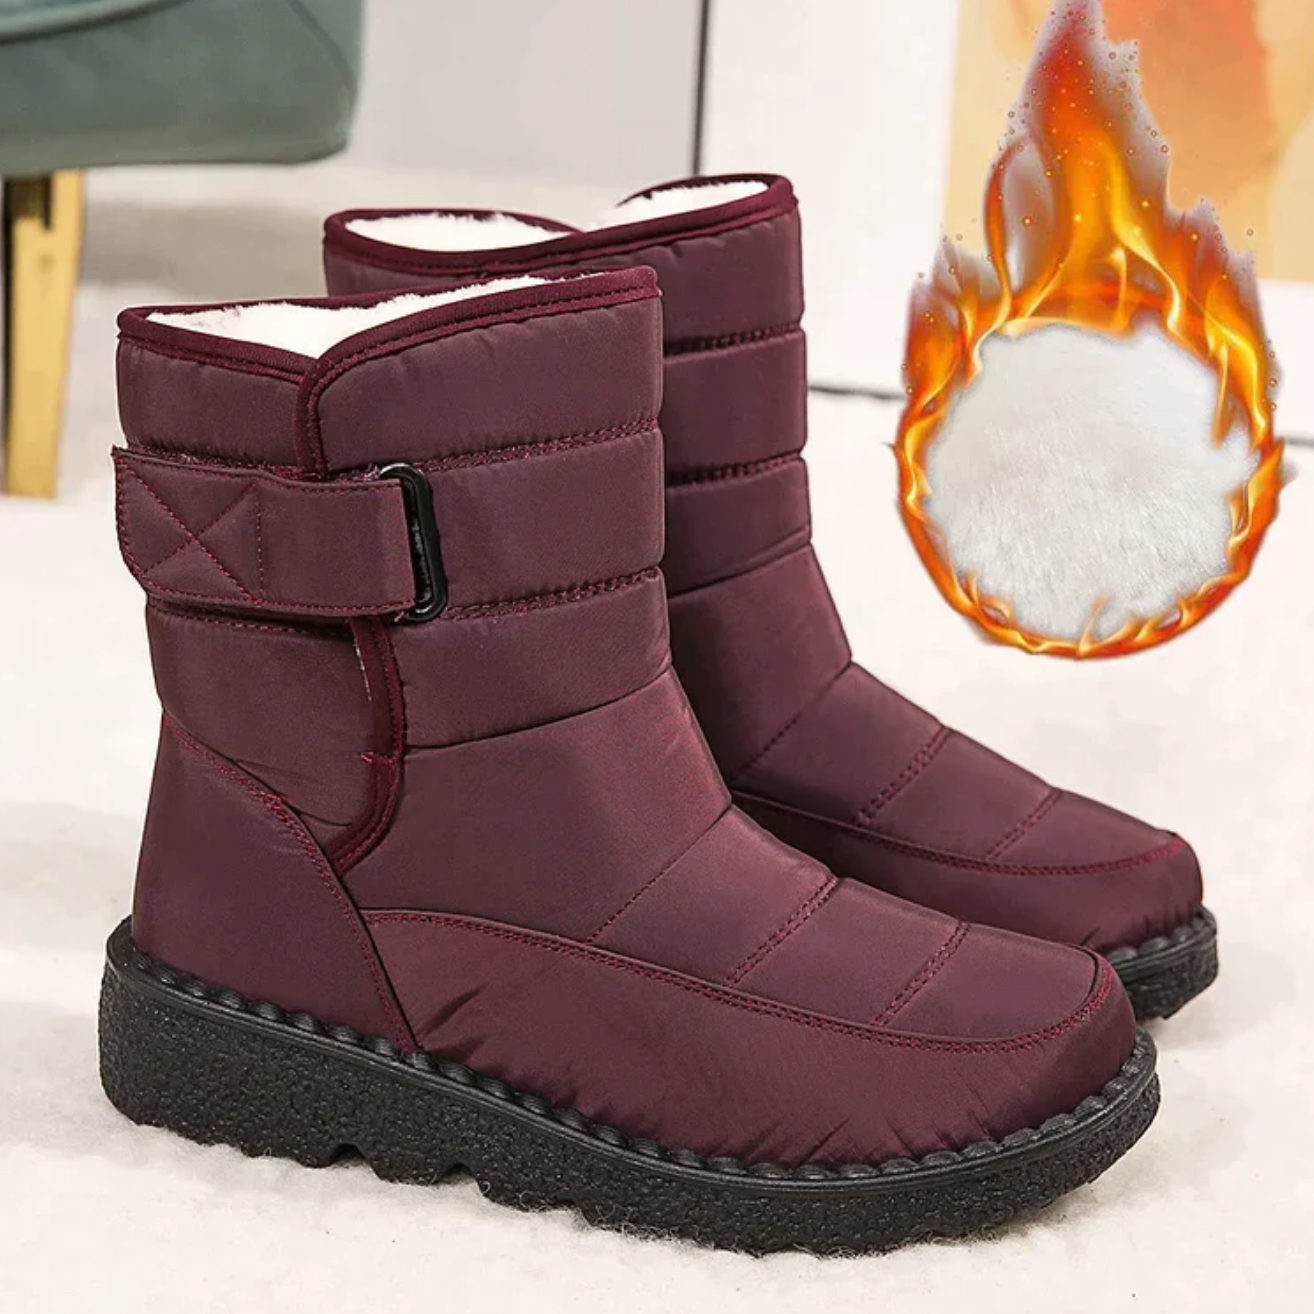 🔥 Pre-Christmas SALE - 50%OFF🔥Women's Waterproof Non-slip Warm Ankle Snow Boots